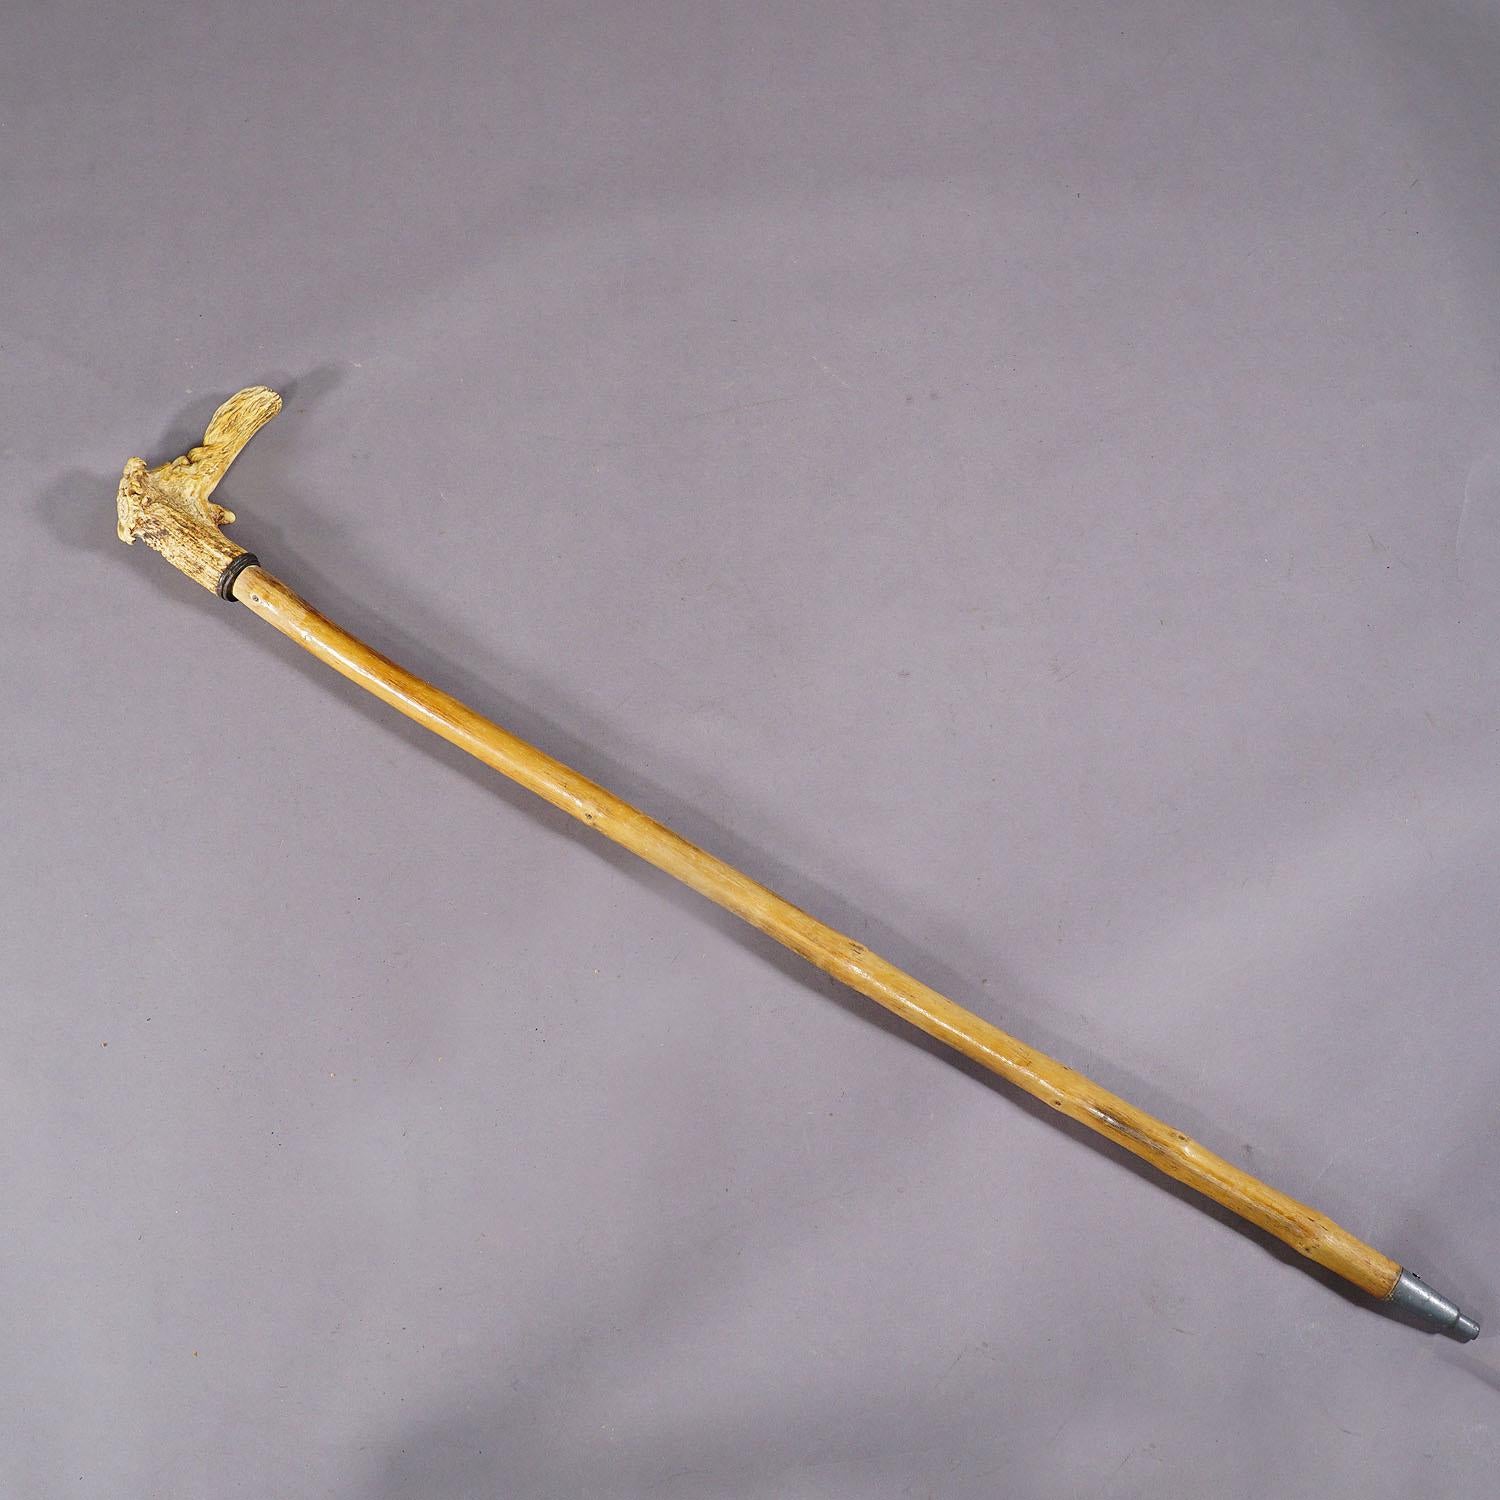 Rustic An Antique Walking Stick with Carved Deer Antler Handle For Sale